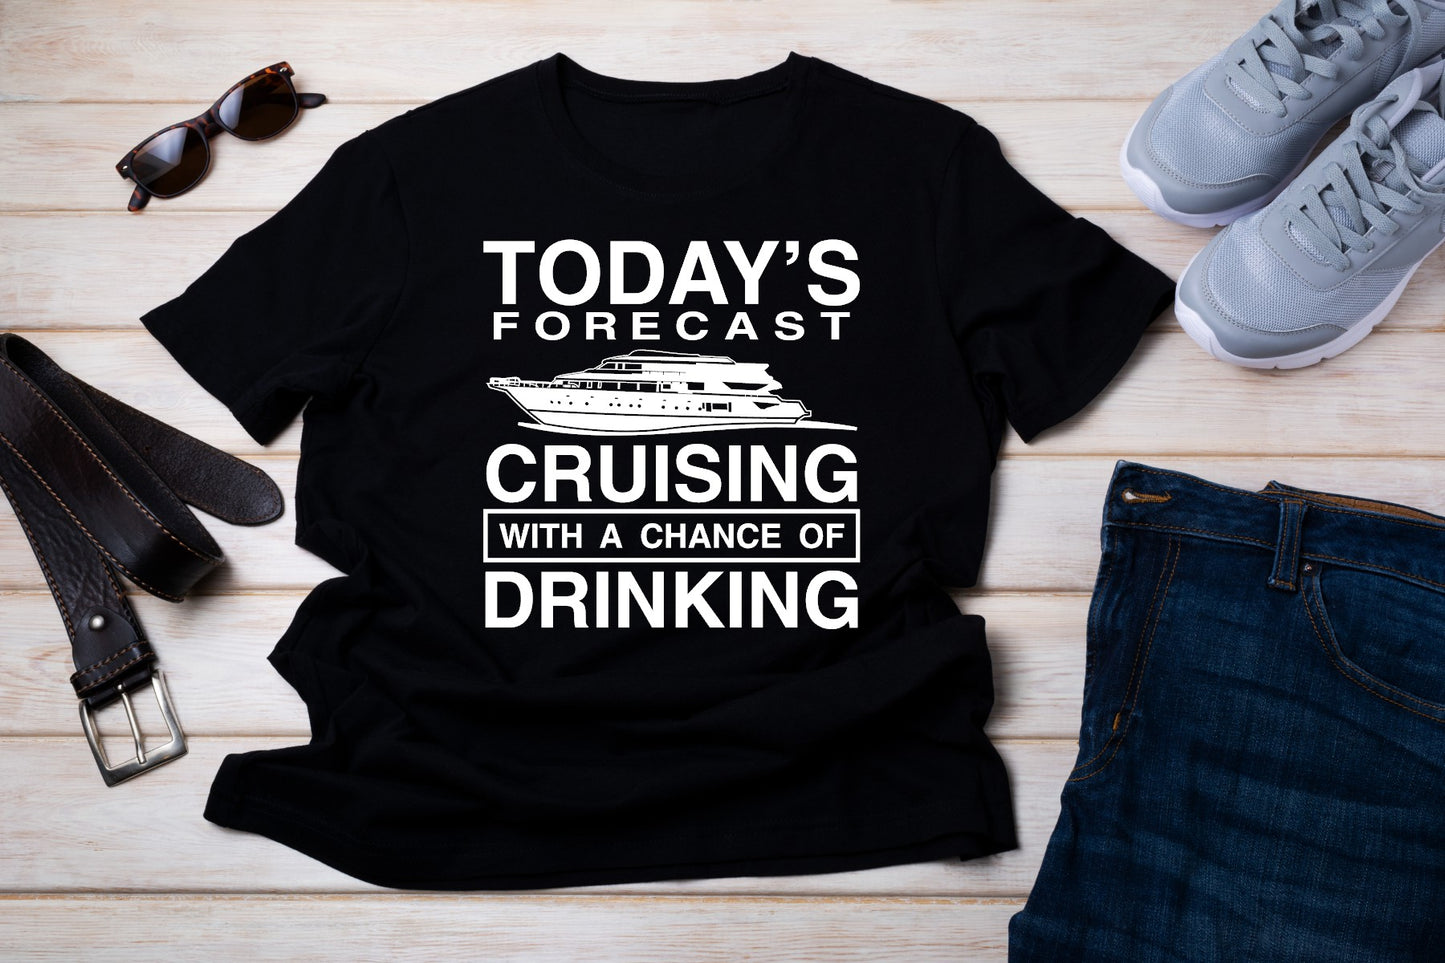 Today's forecast cruising with a Chance of Drinking